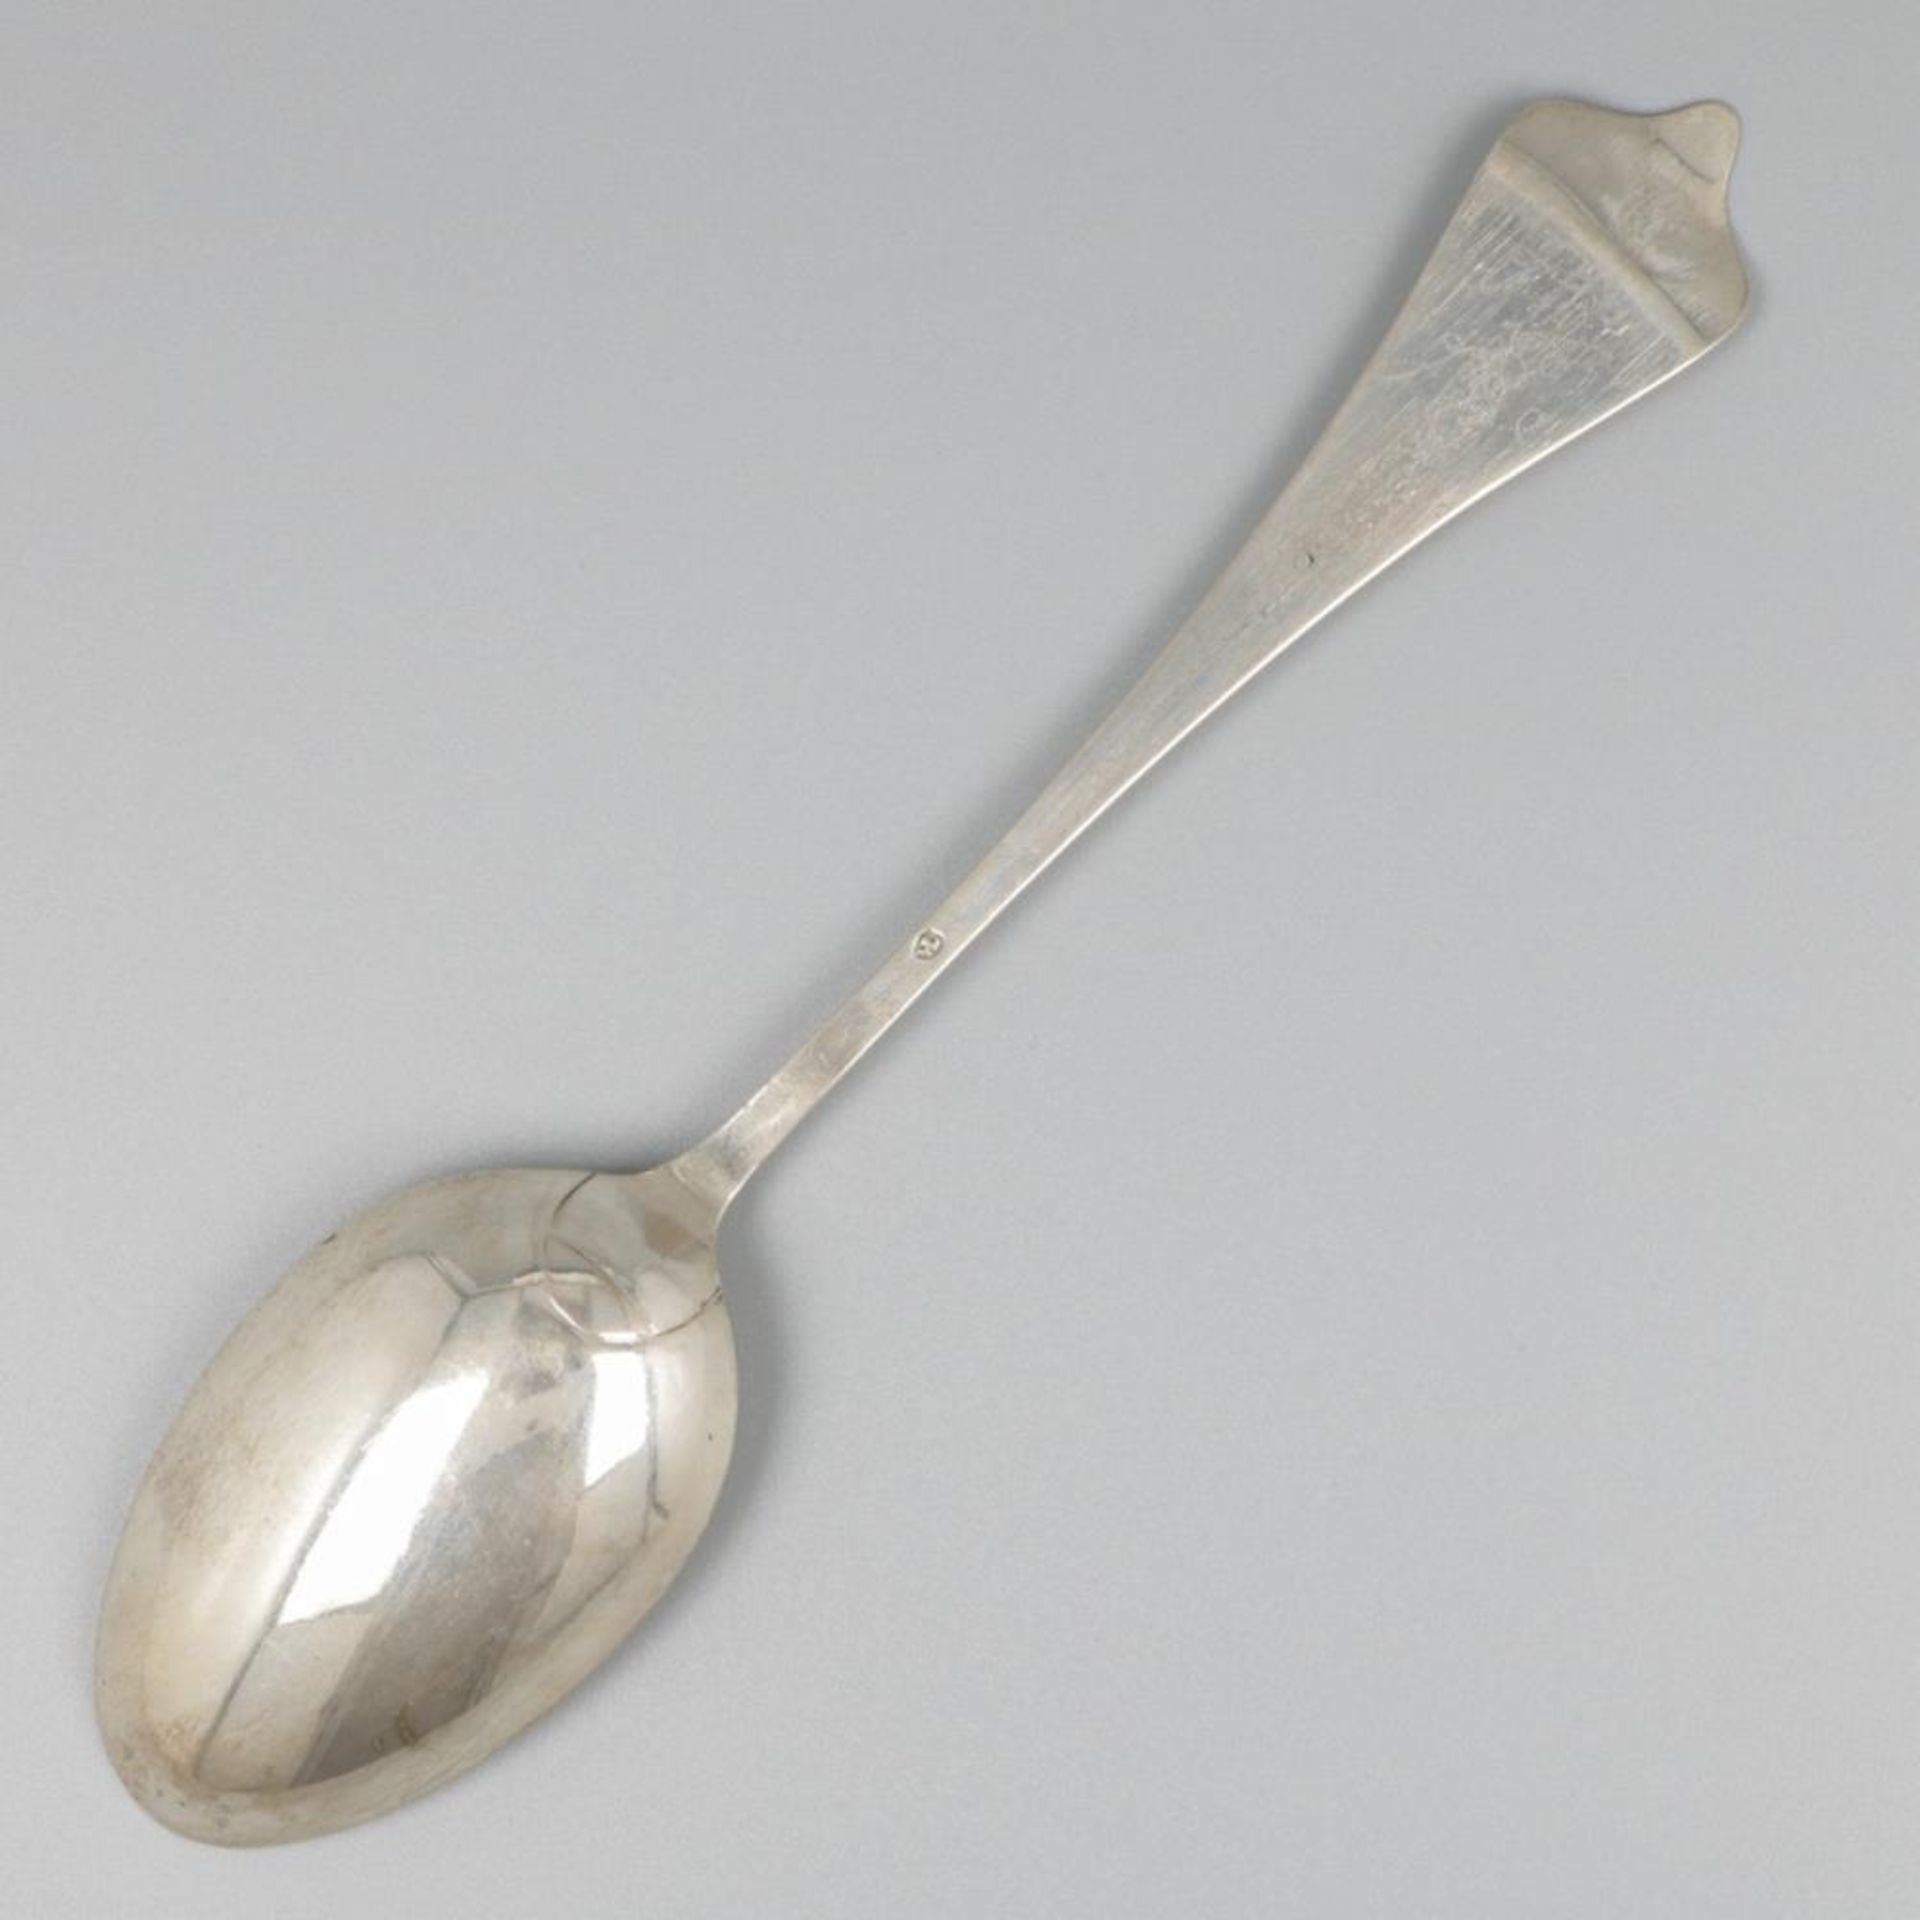 Spoon (Netherlands 18th century) silver. - Image 4 of 6